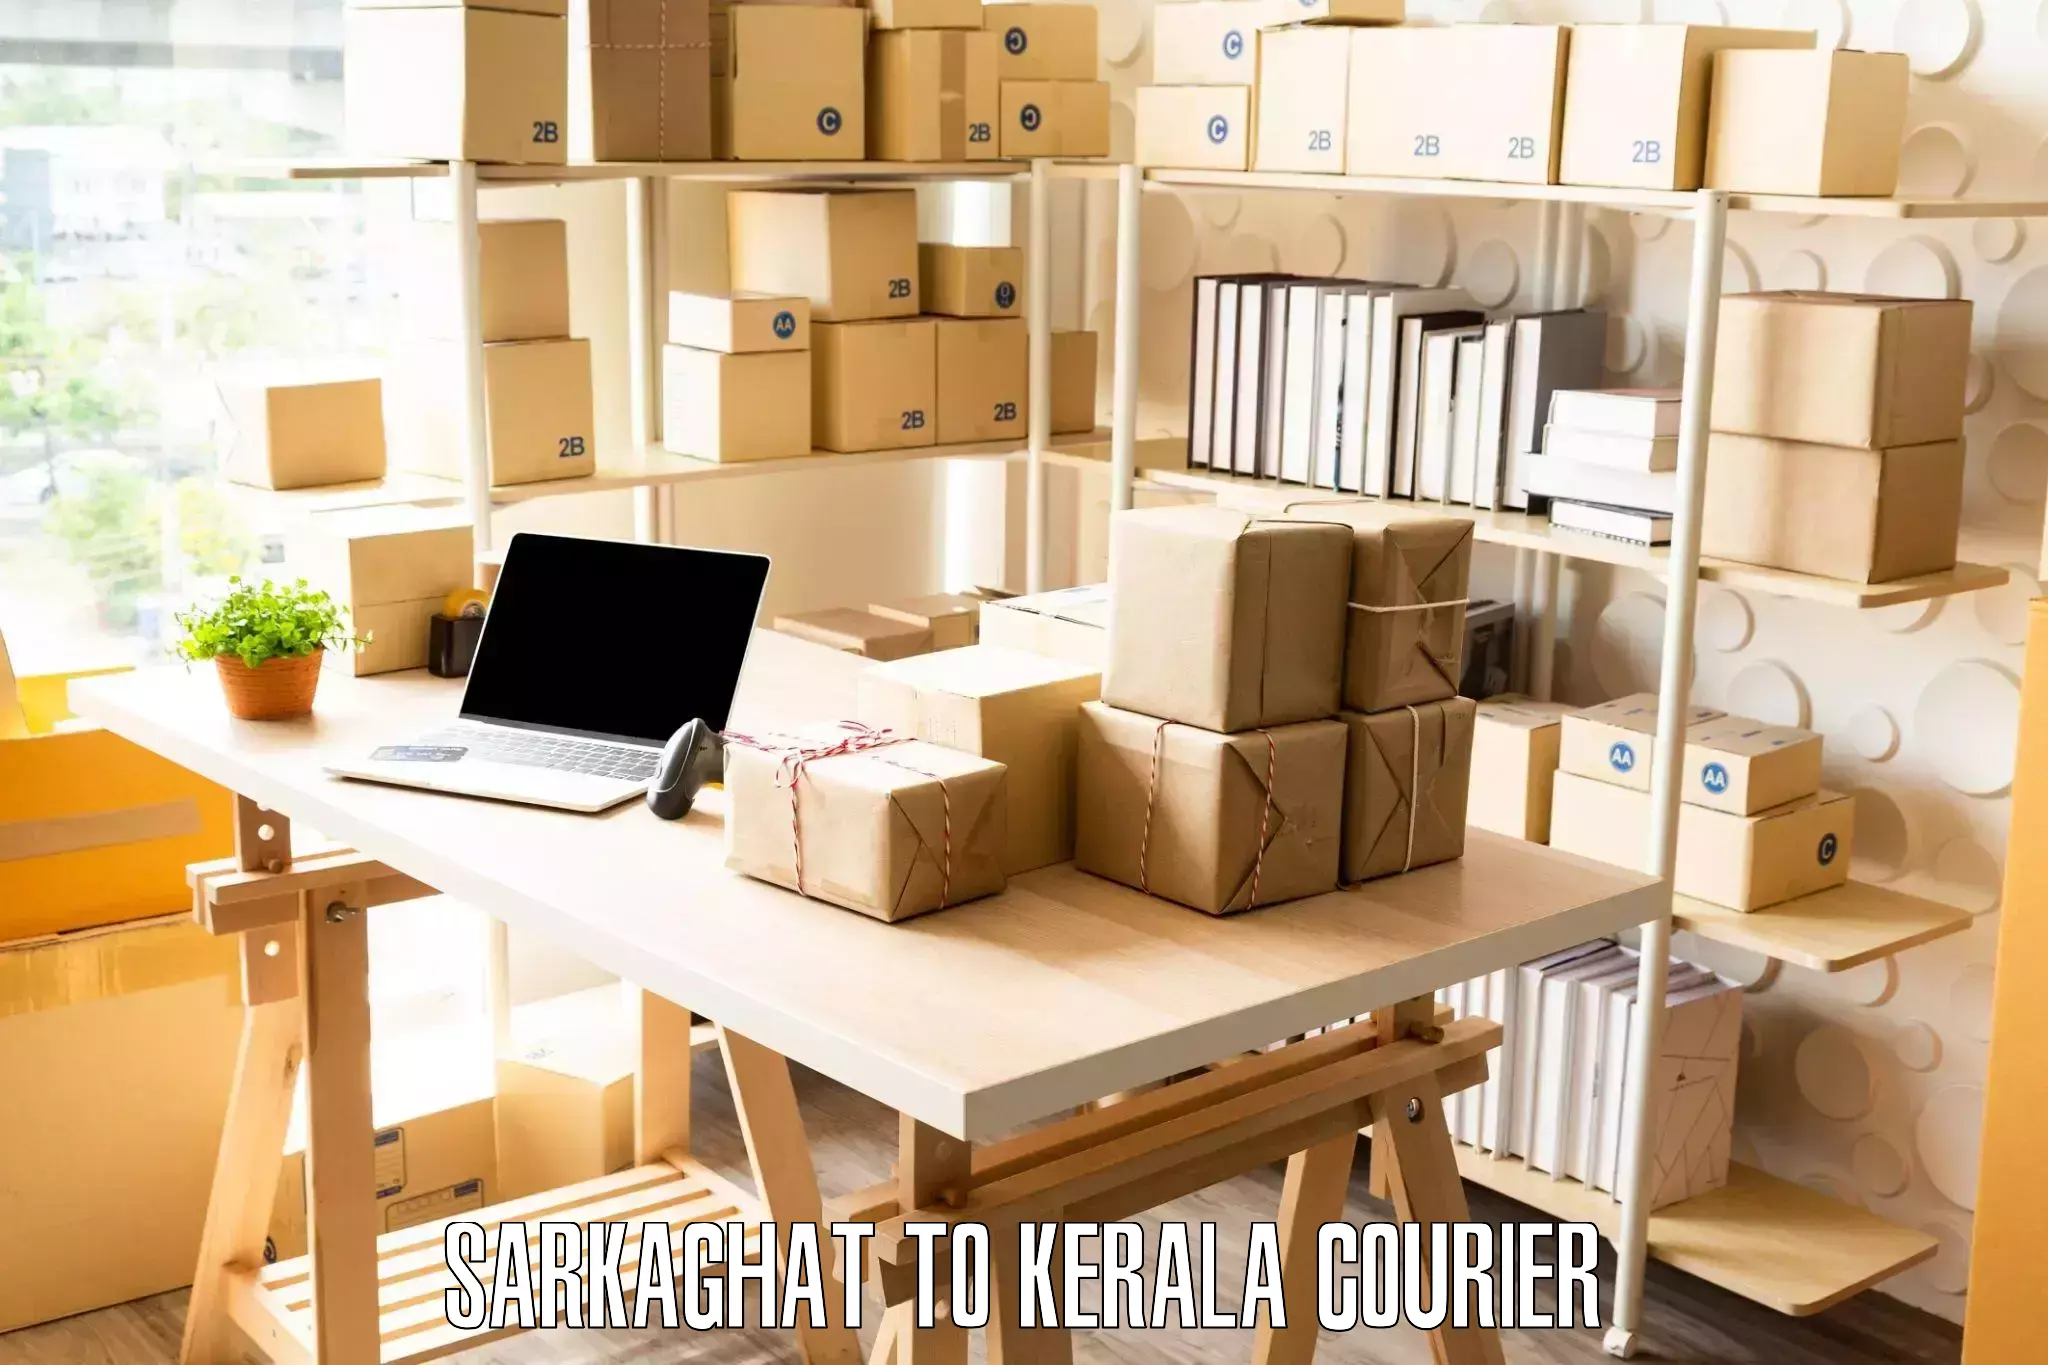 Advanced relocation solutions Sarkaghat to Kerala